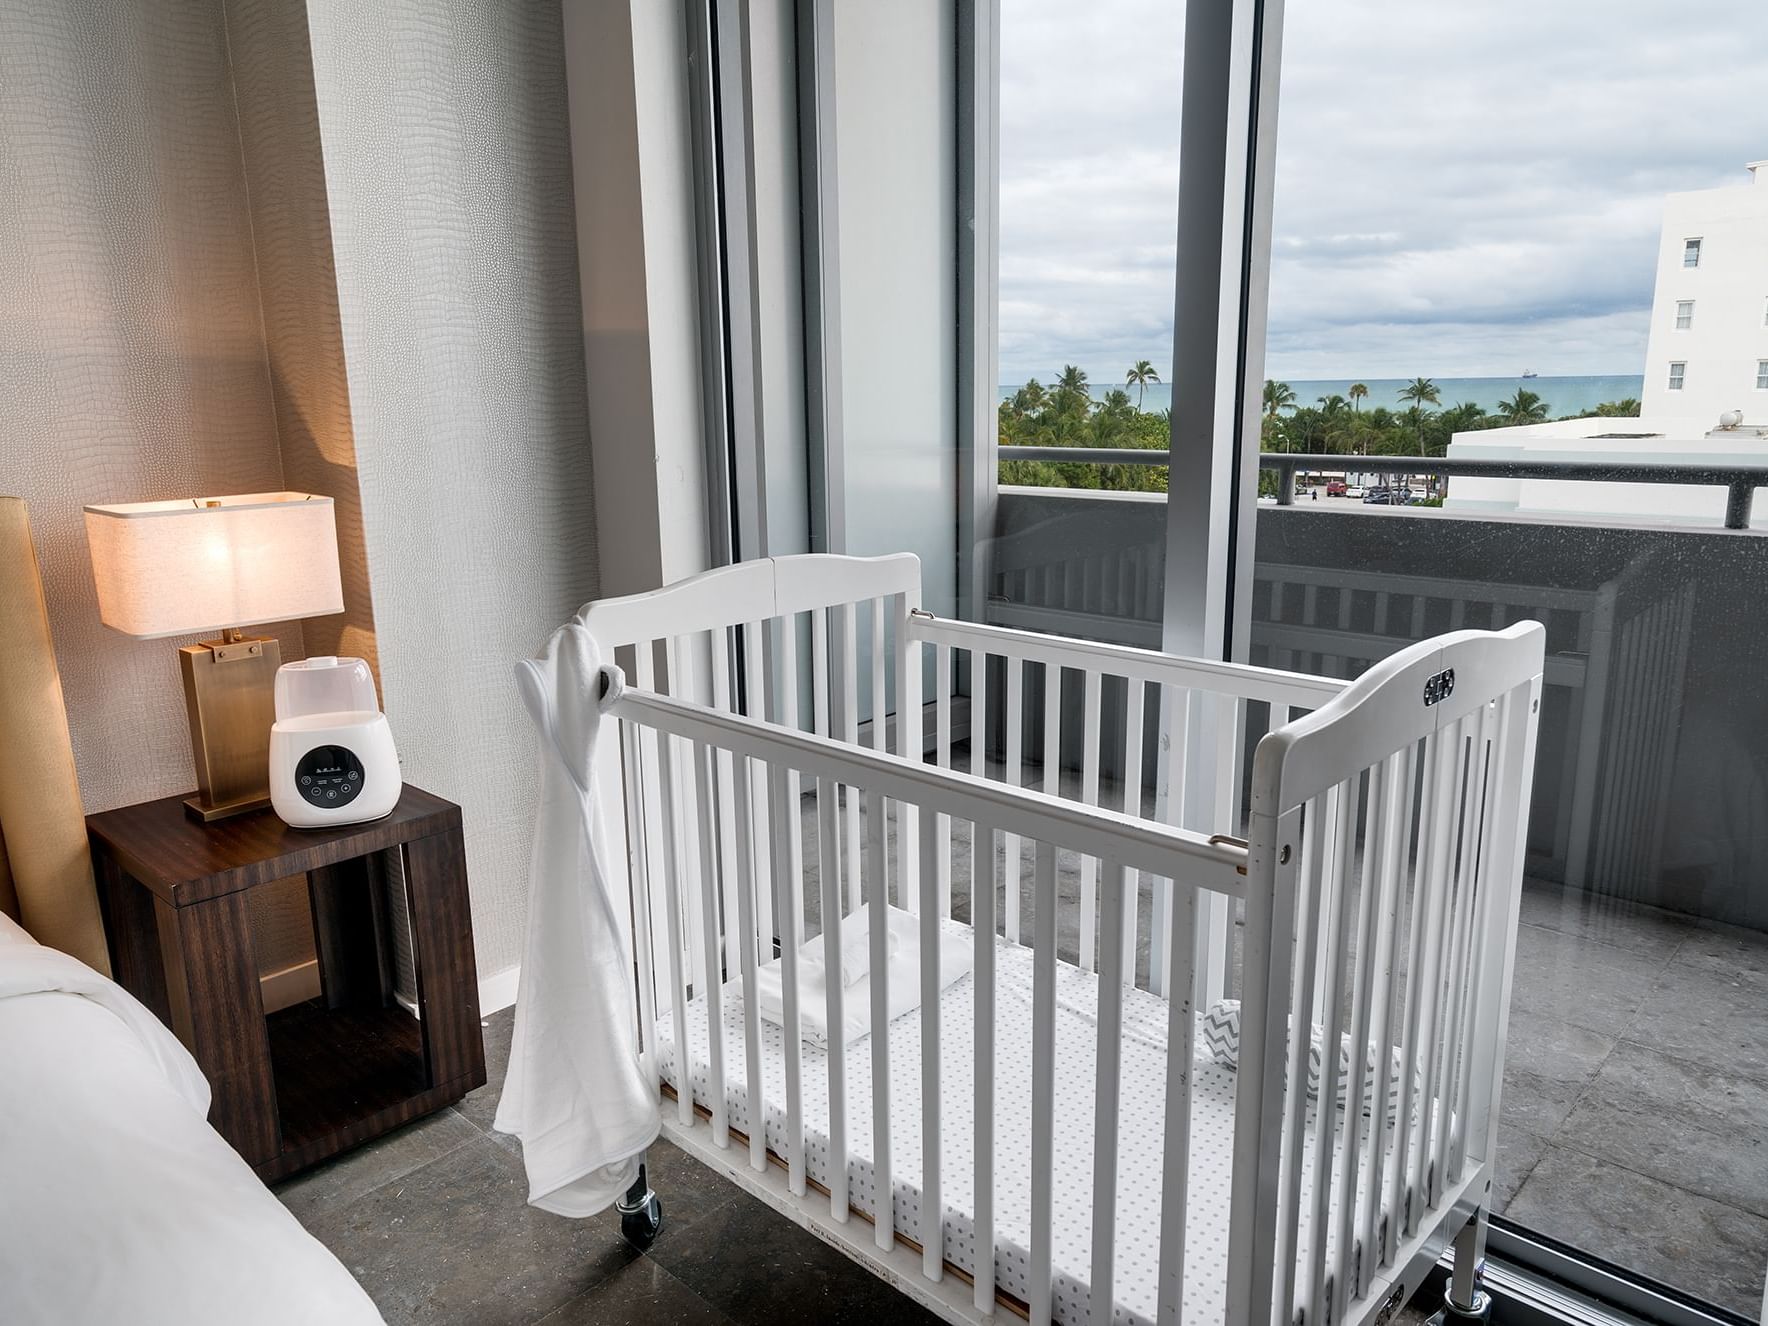 A crib near bed in bedroom at Boulan South Beach Hotel